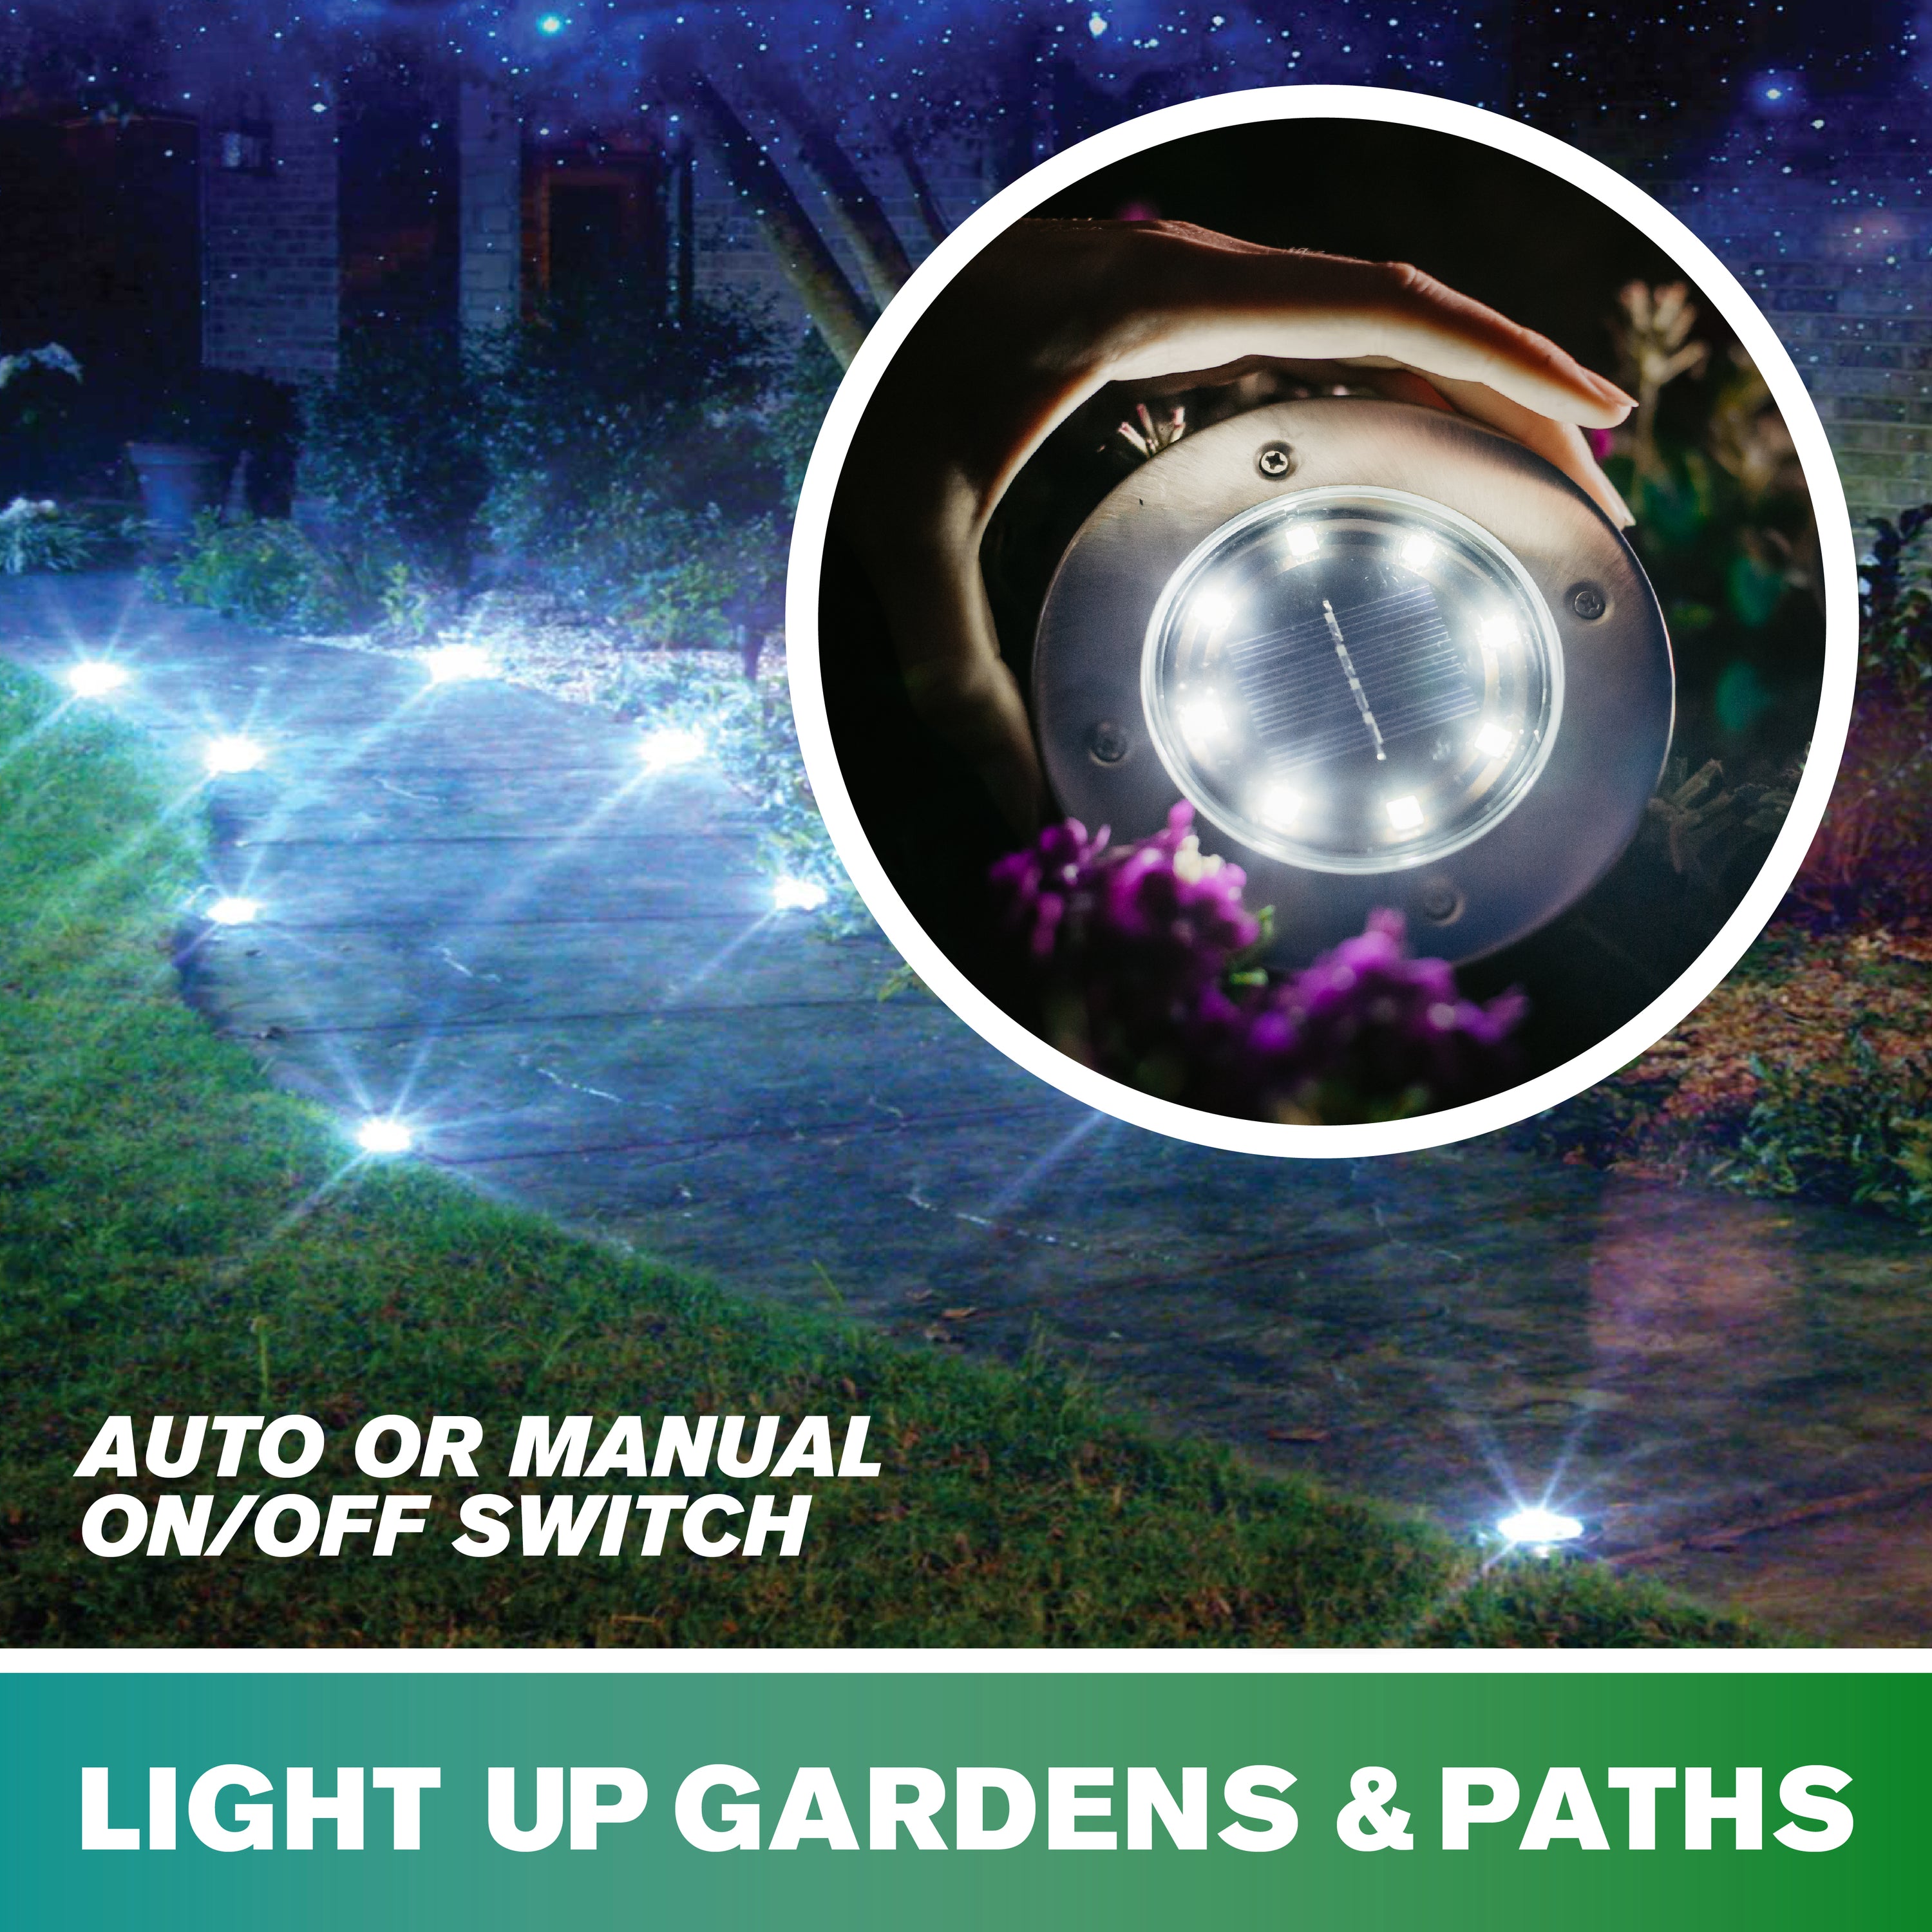 Bell + Howell Pathway & Landscape Swivel Disk Solar Powered Outdoor Landscape & Pathway Lights 4-pack